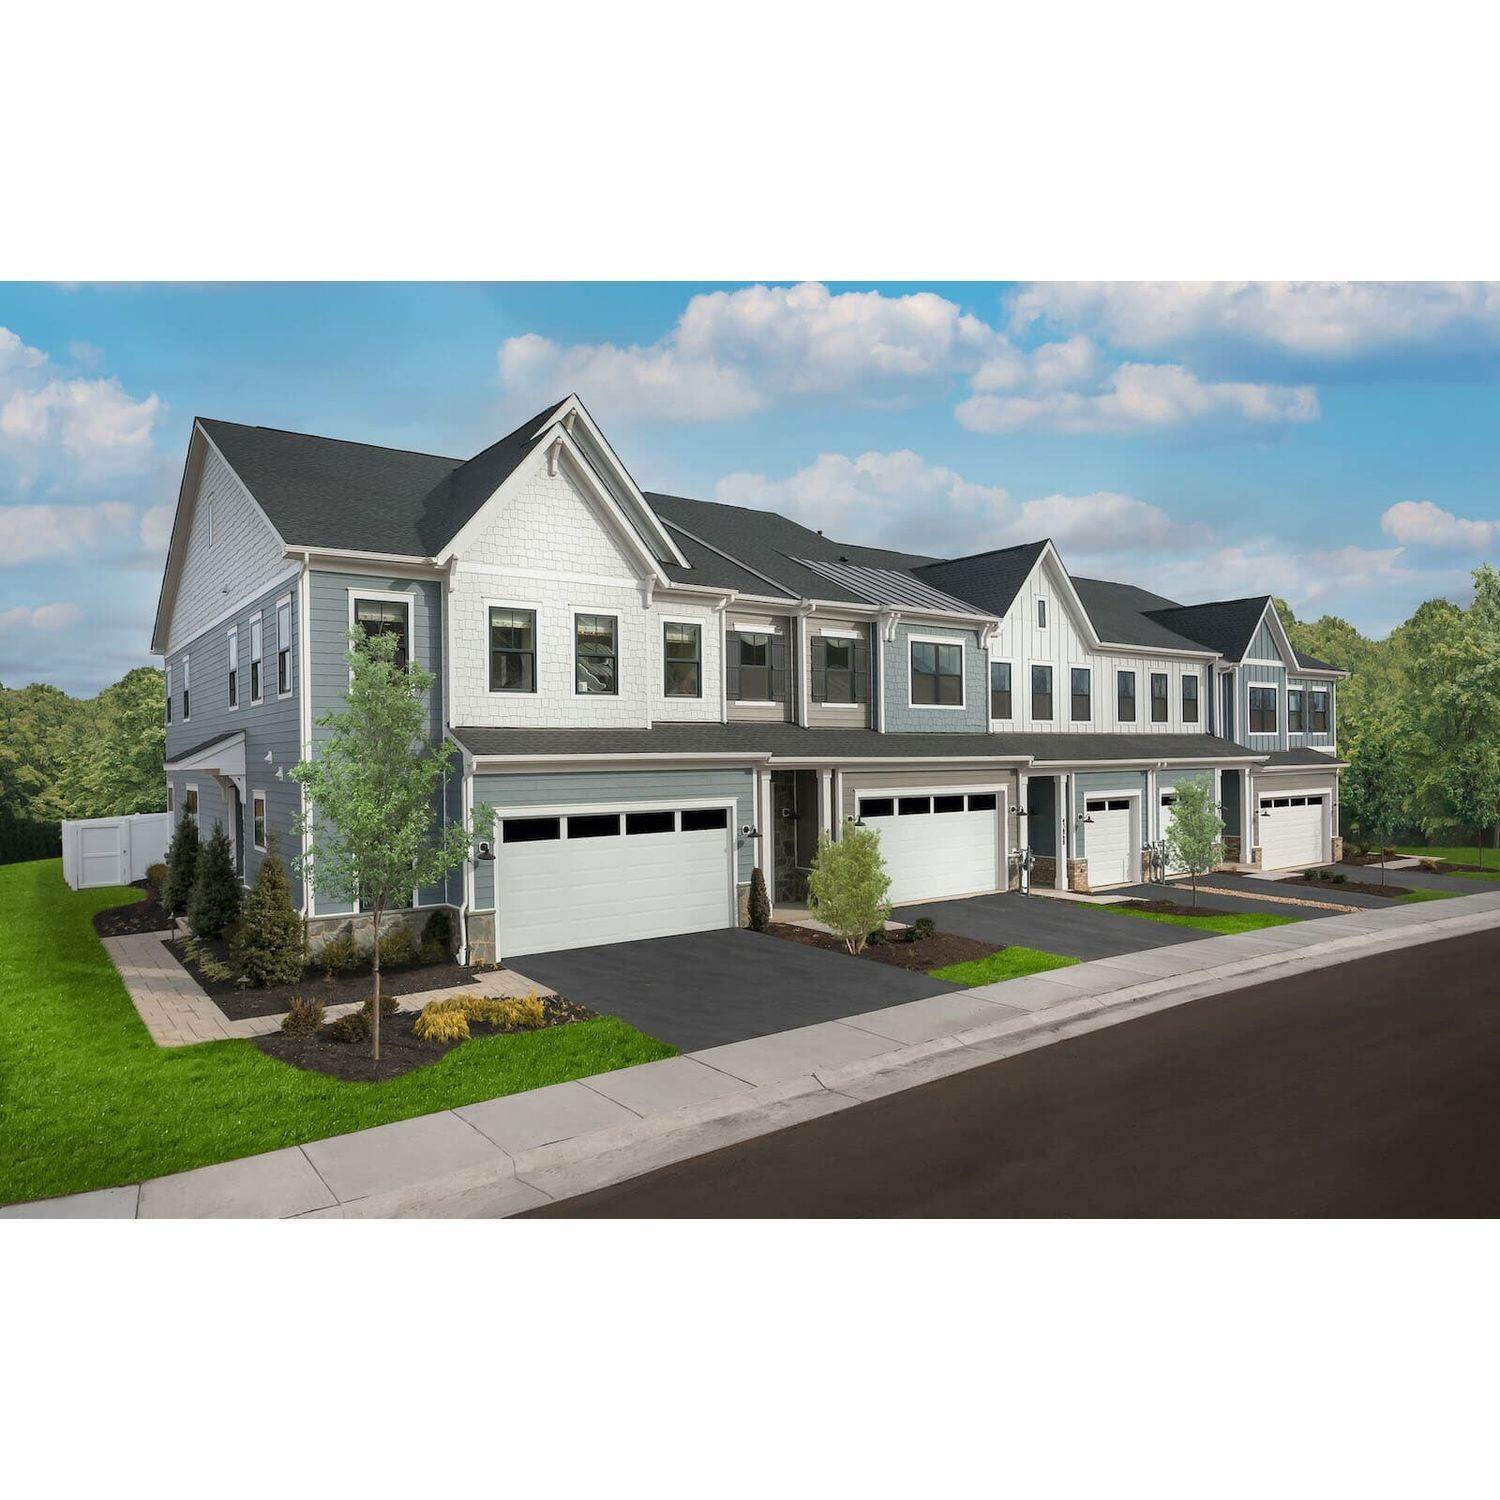 Villetta a schiera per Vendita alle ore 55+ Villas Collection At The Crest At Linton Hall Now Selling From Cadence At Lansdowne, Bristow, VA 20136